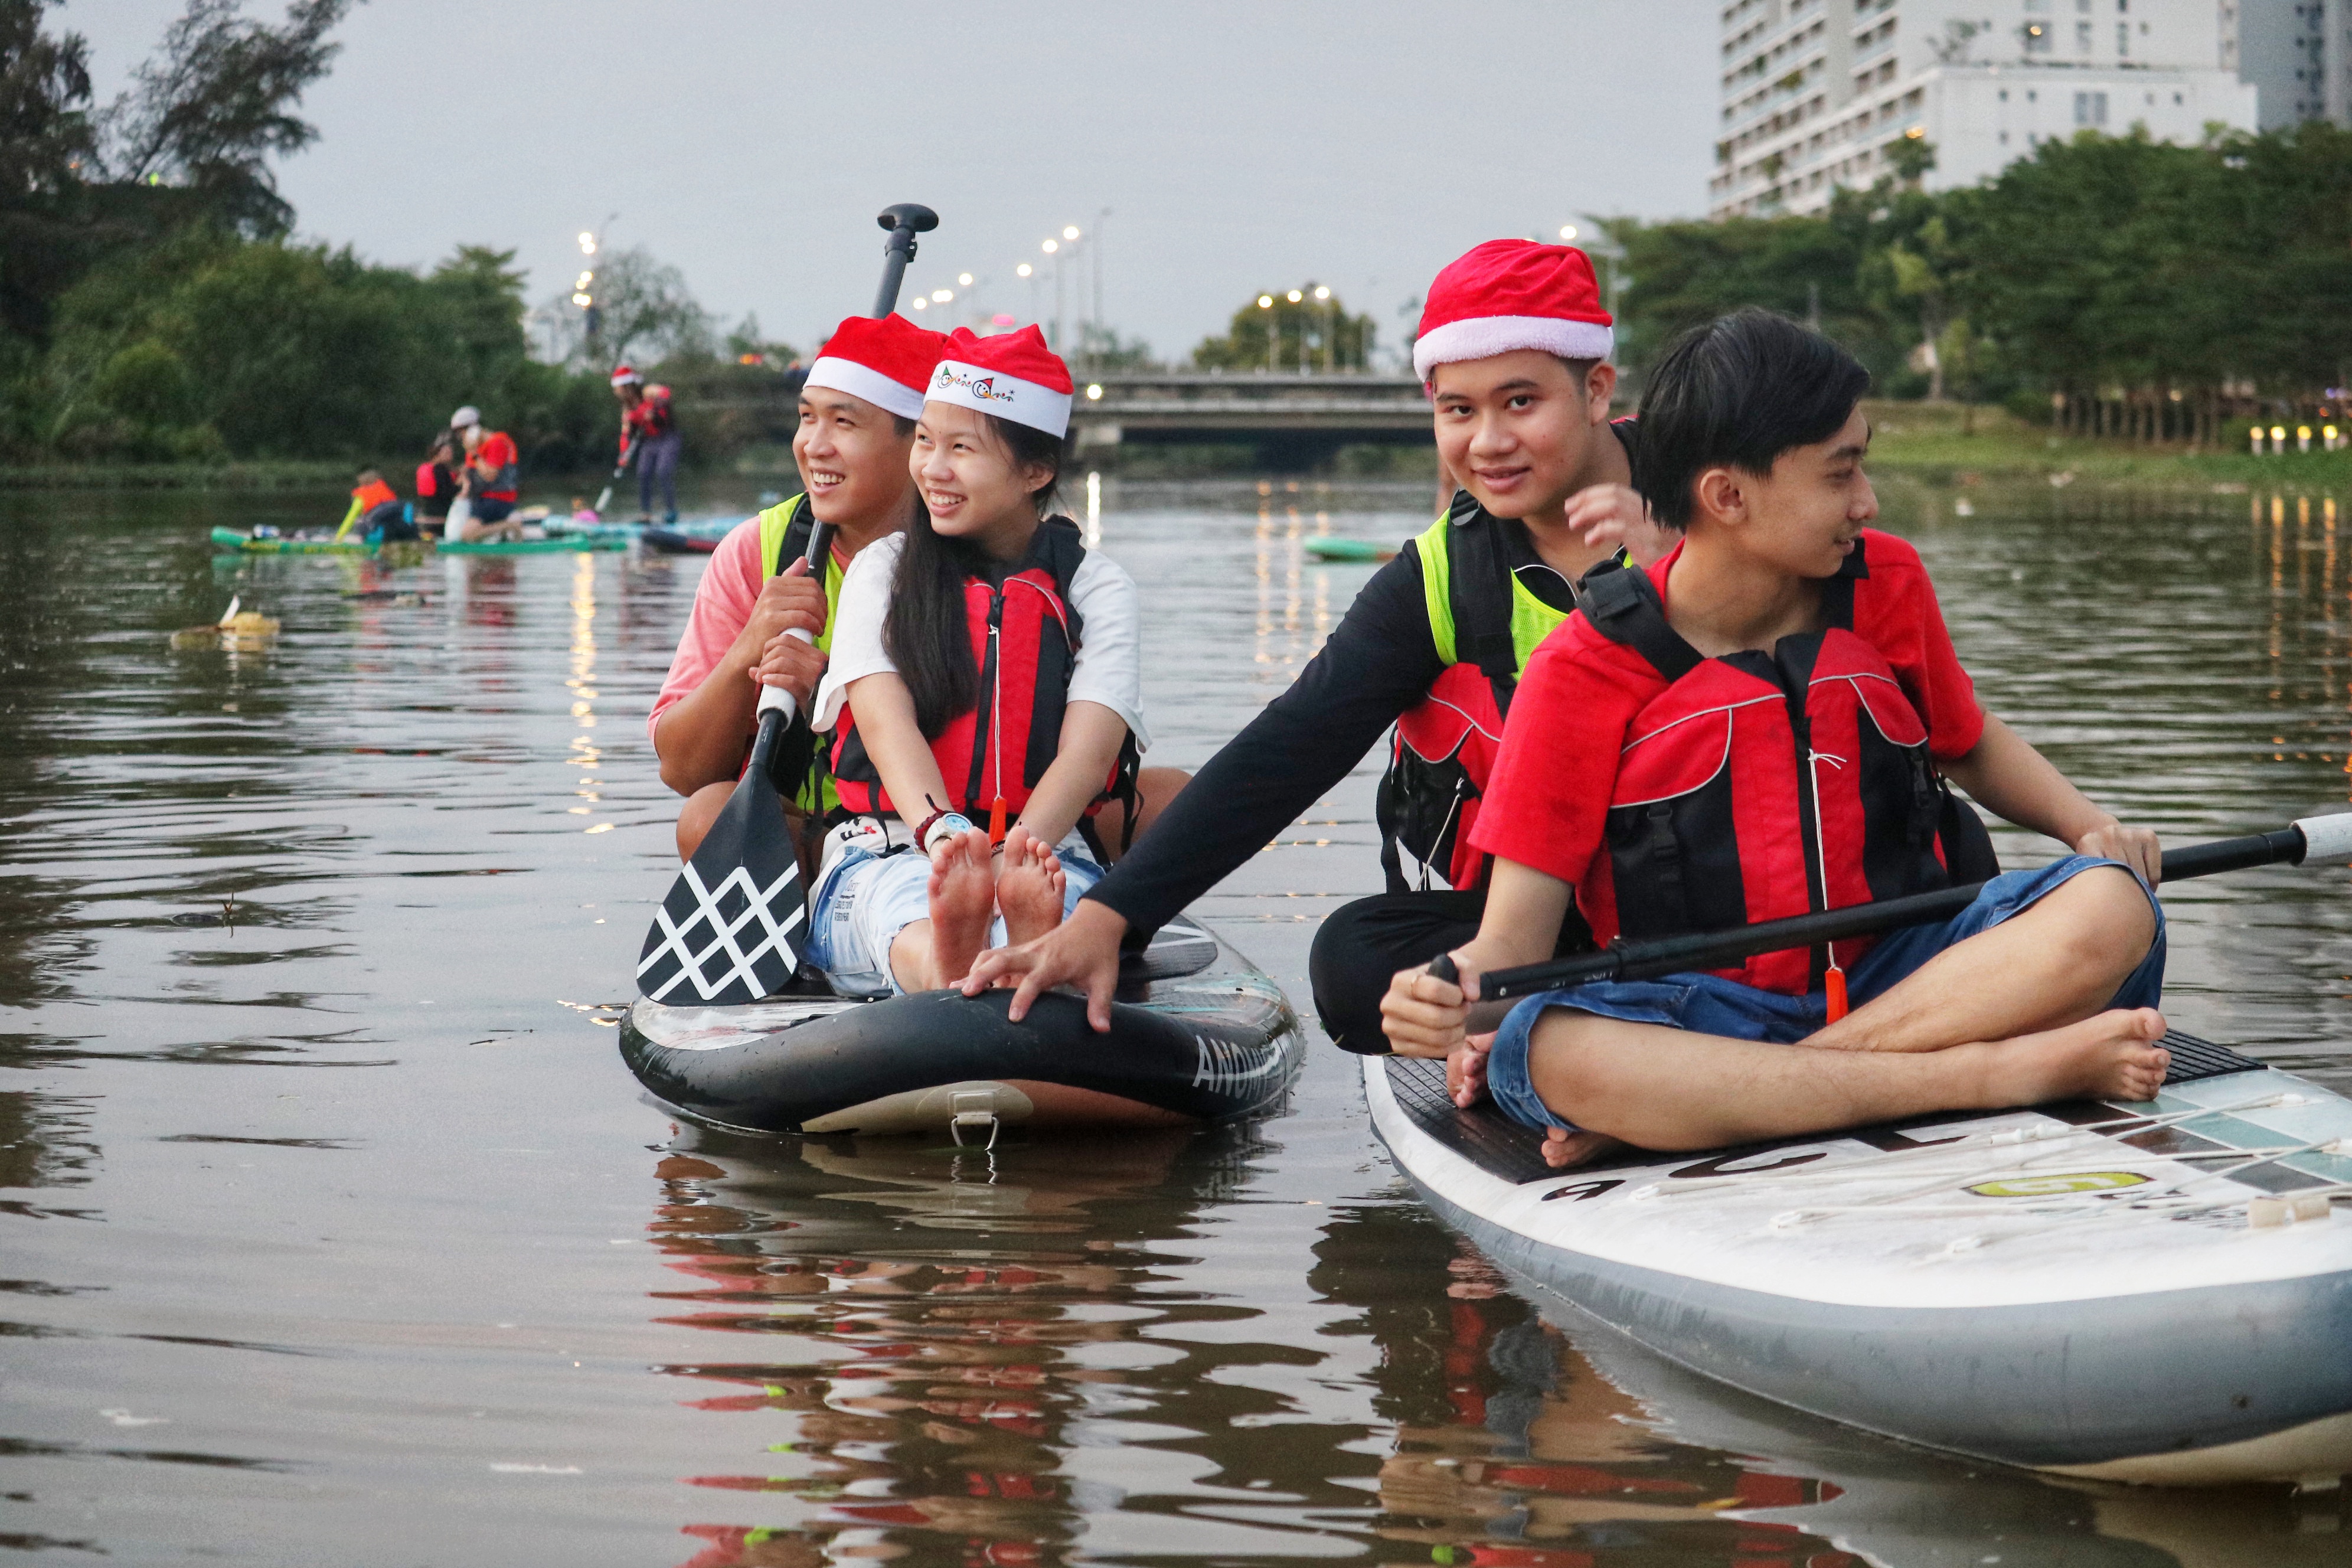 Each young paddler is accompanied by a coach to ensure safety. Photo: Hoang An / Tuoi Tre News